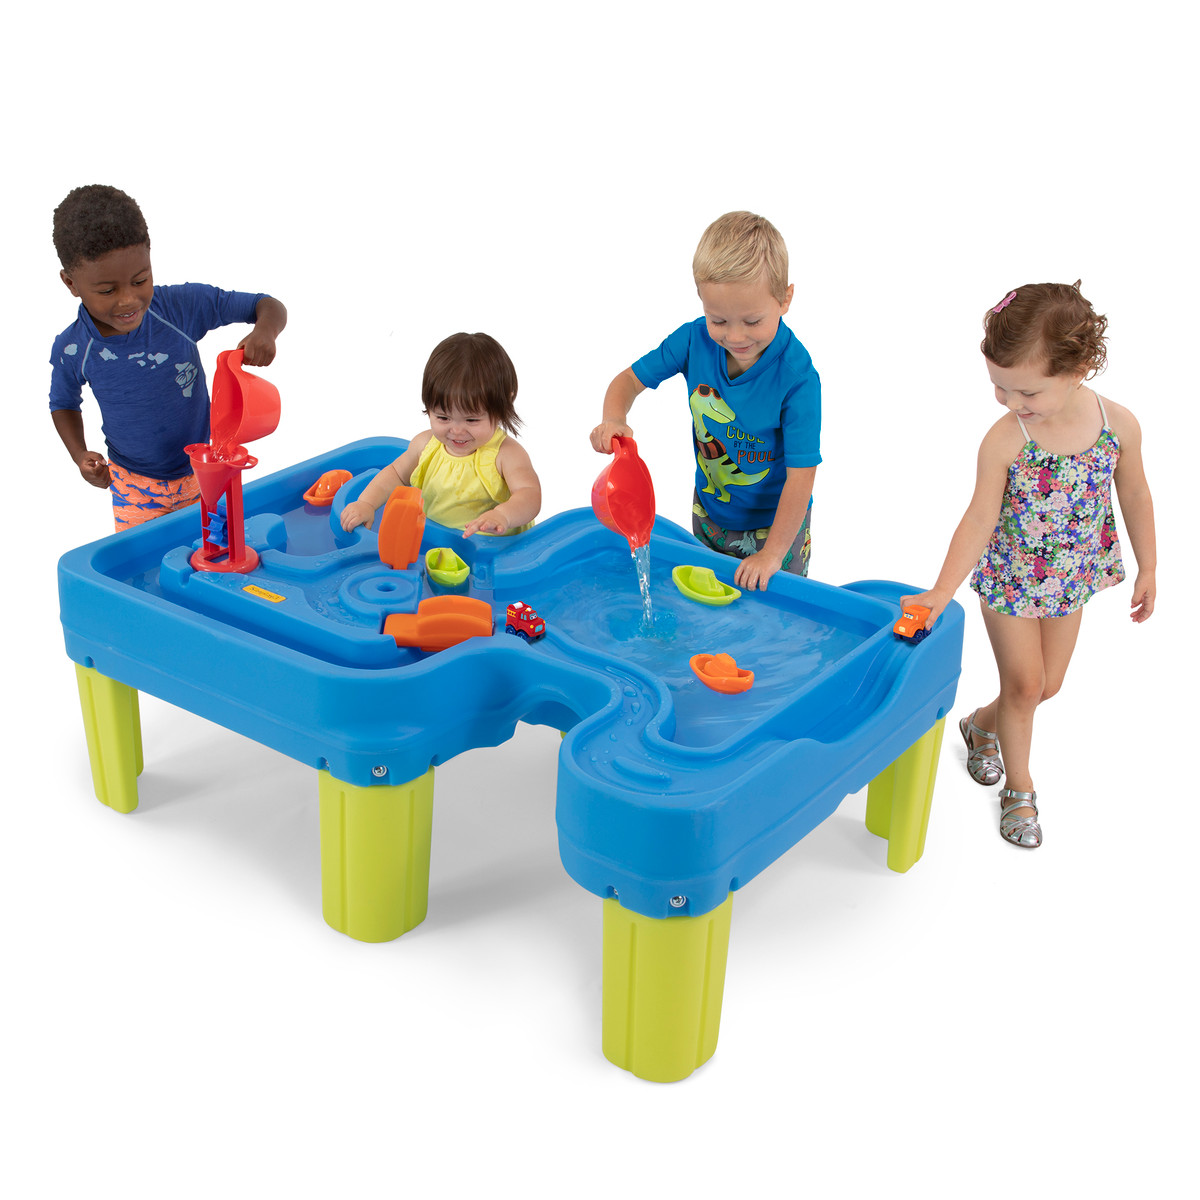 Kids playing at the Simplay3 Big Rivers and Roads giant activity water table